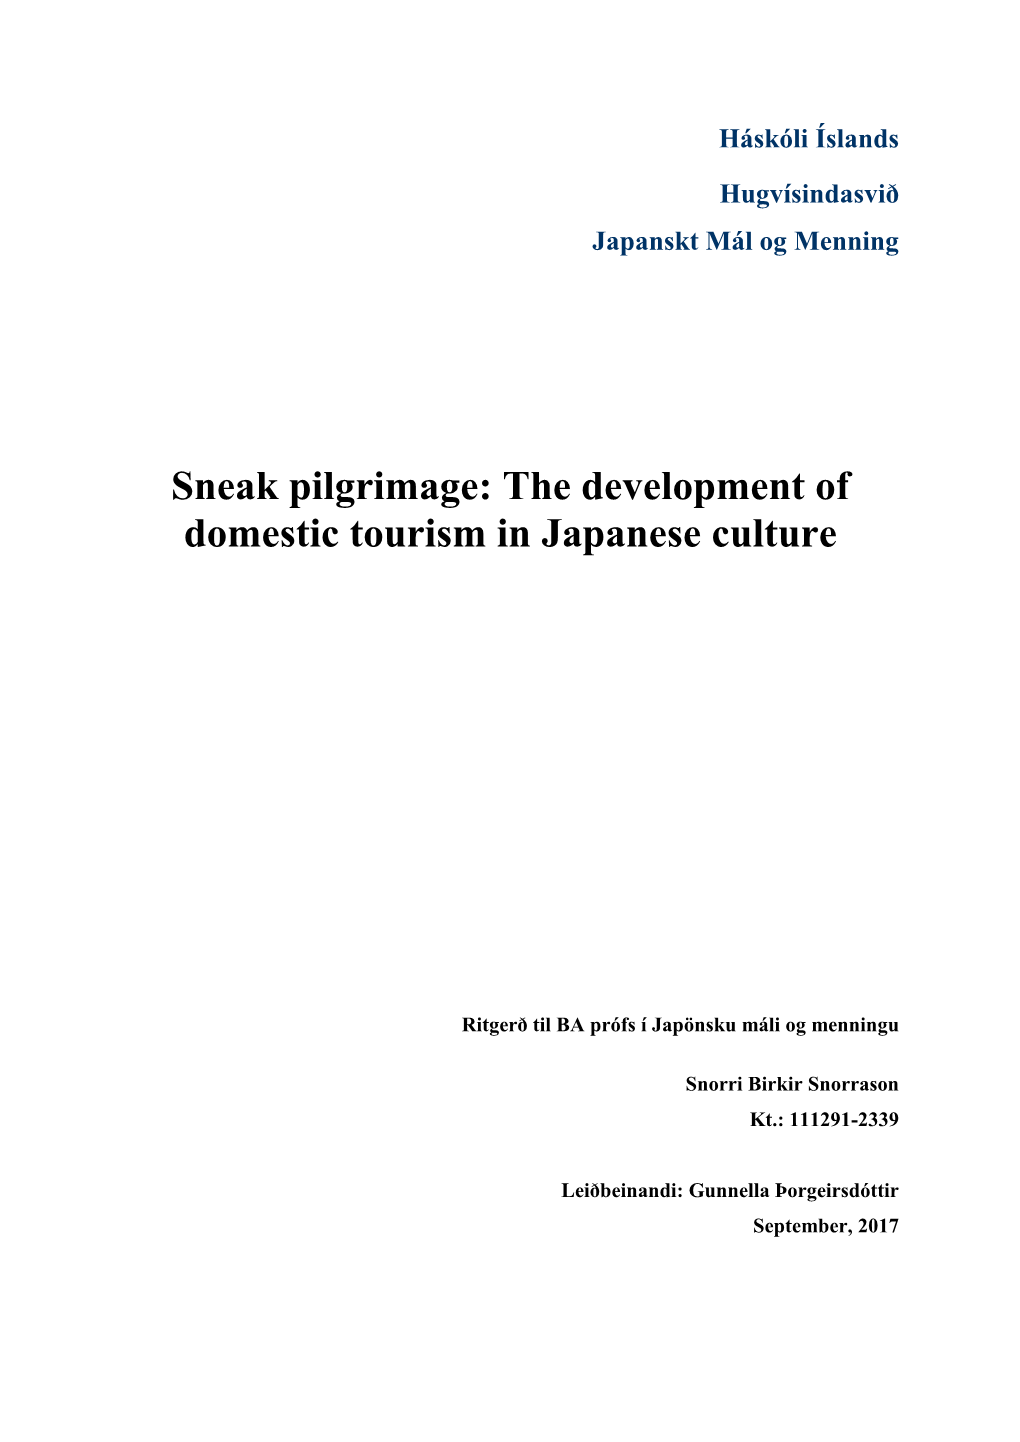 The Development of Domestic Tourism in Japanese Culture